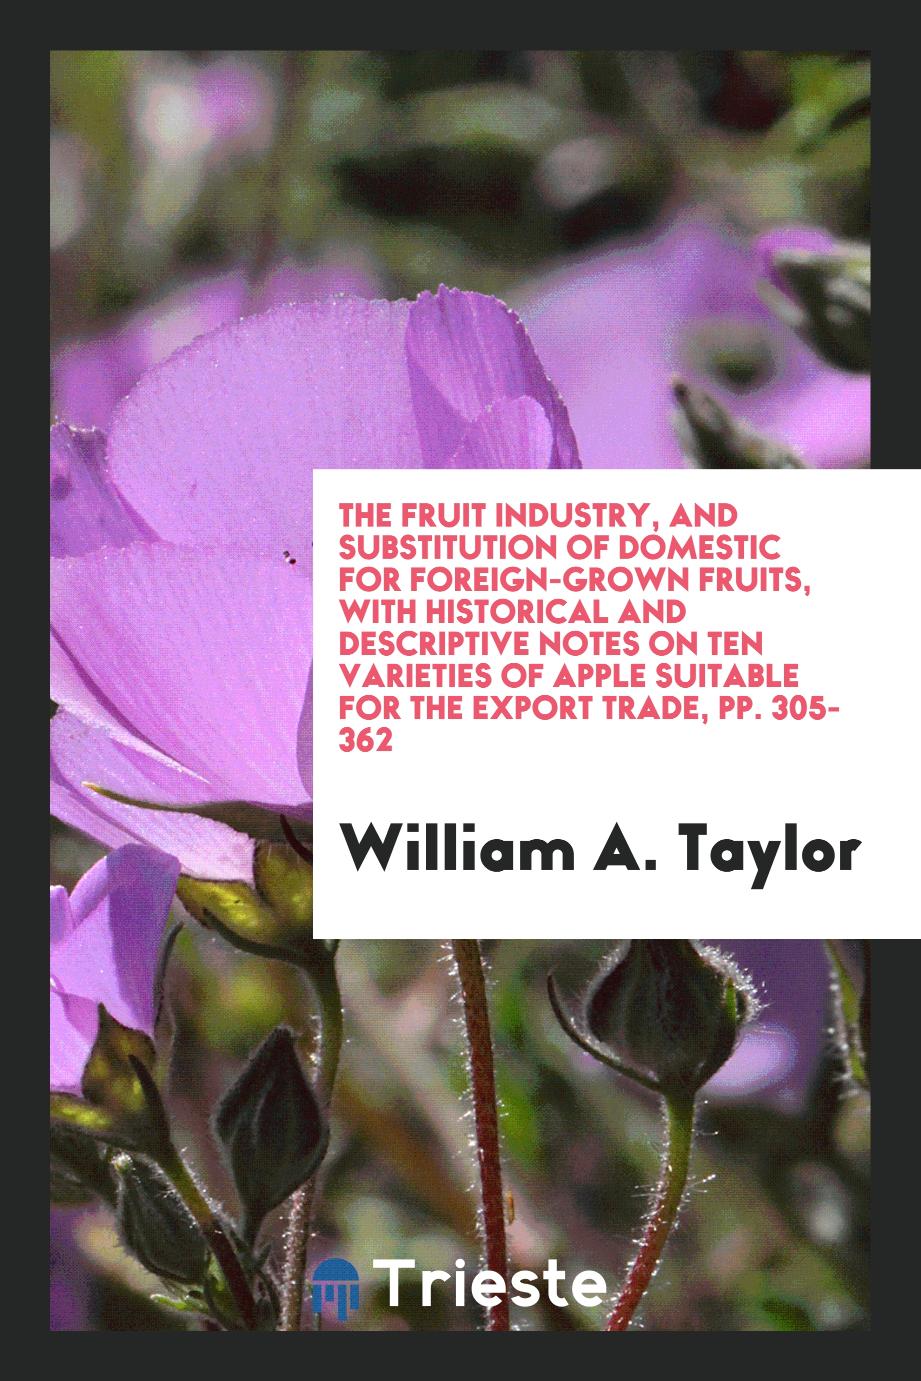 The fruit industry, and substitution of domestic for foreign-grown fruits, with historical and descriptive notes on ten varieties of apple suitable for the export trade, pp. 305-362